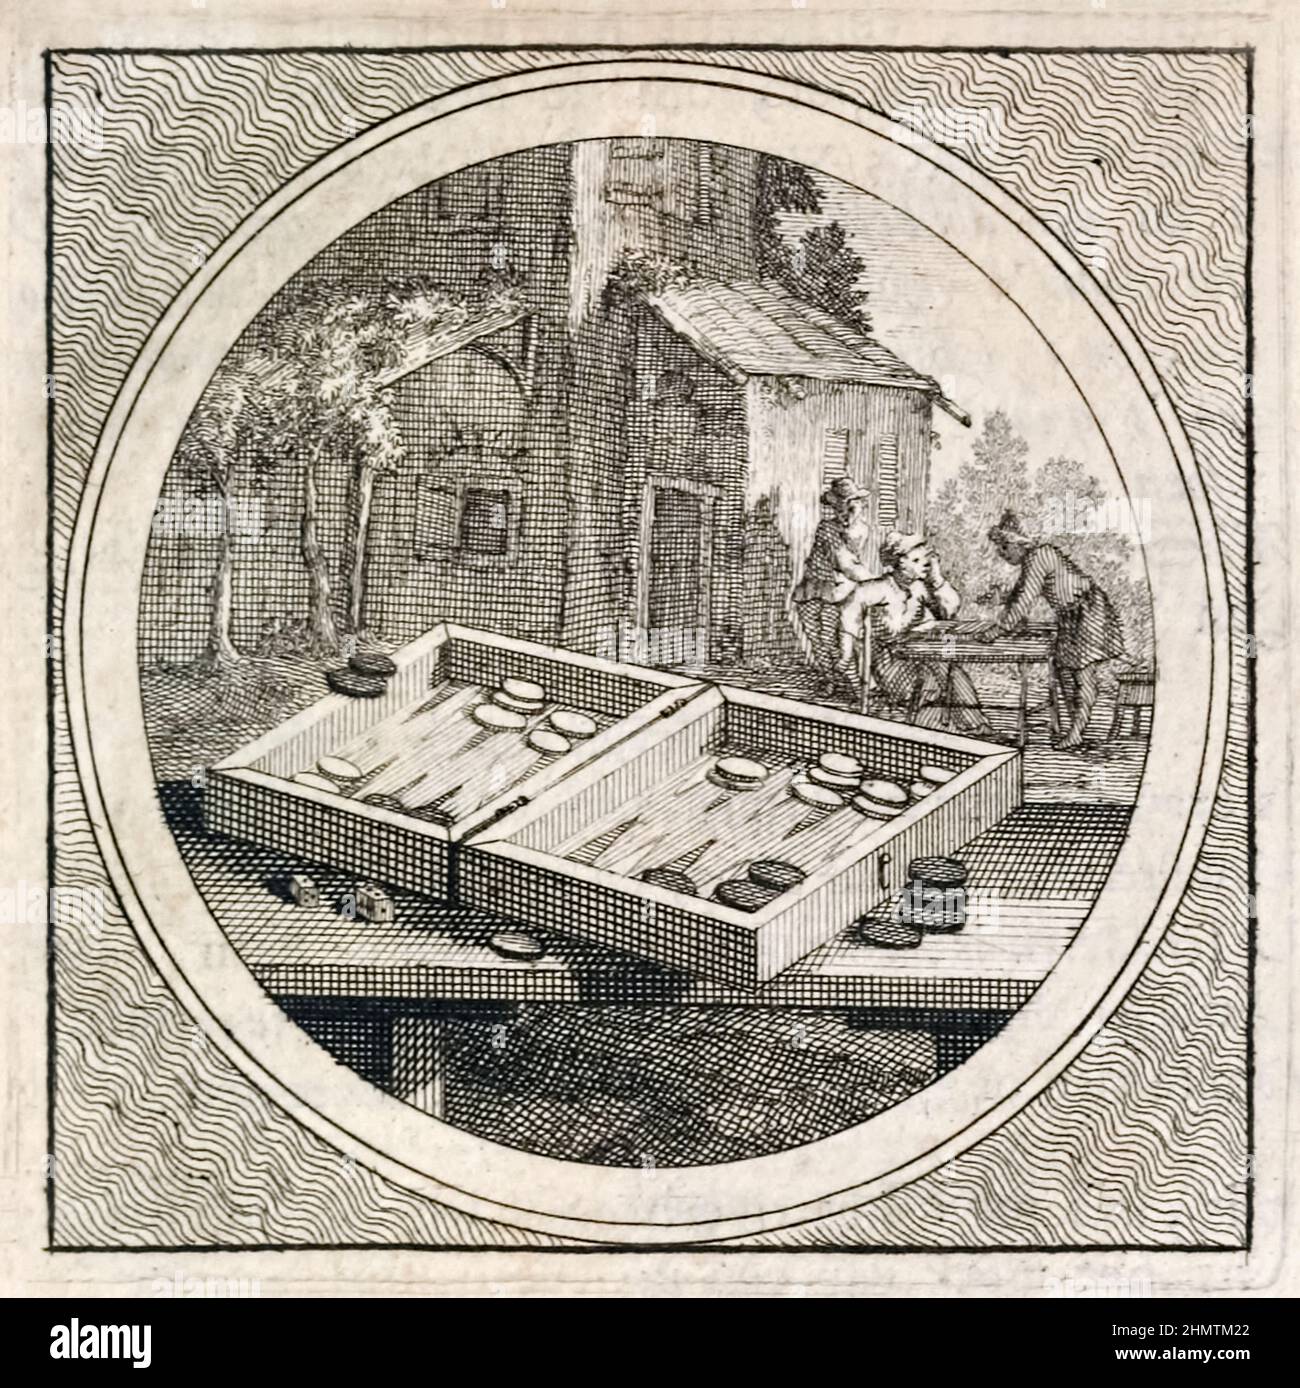 Backgammon set and players from Stichtelyke Zinnebeelde by Arnold Houbraken (1660-1719). Photograph of original engraving published in 1723. Stock Photo